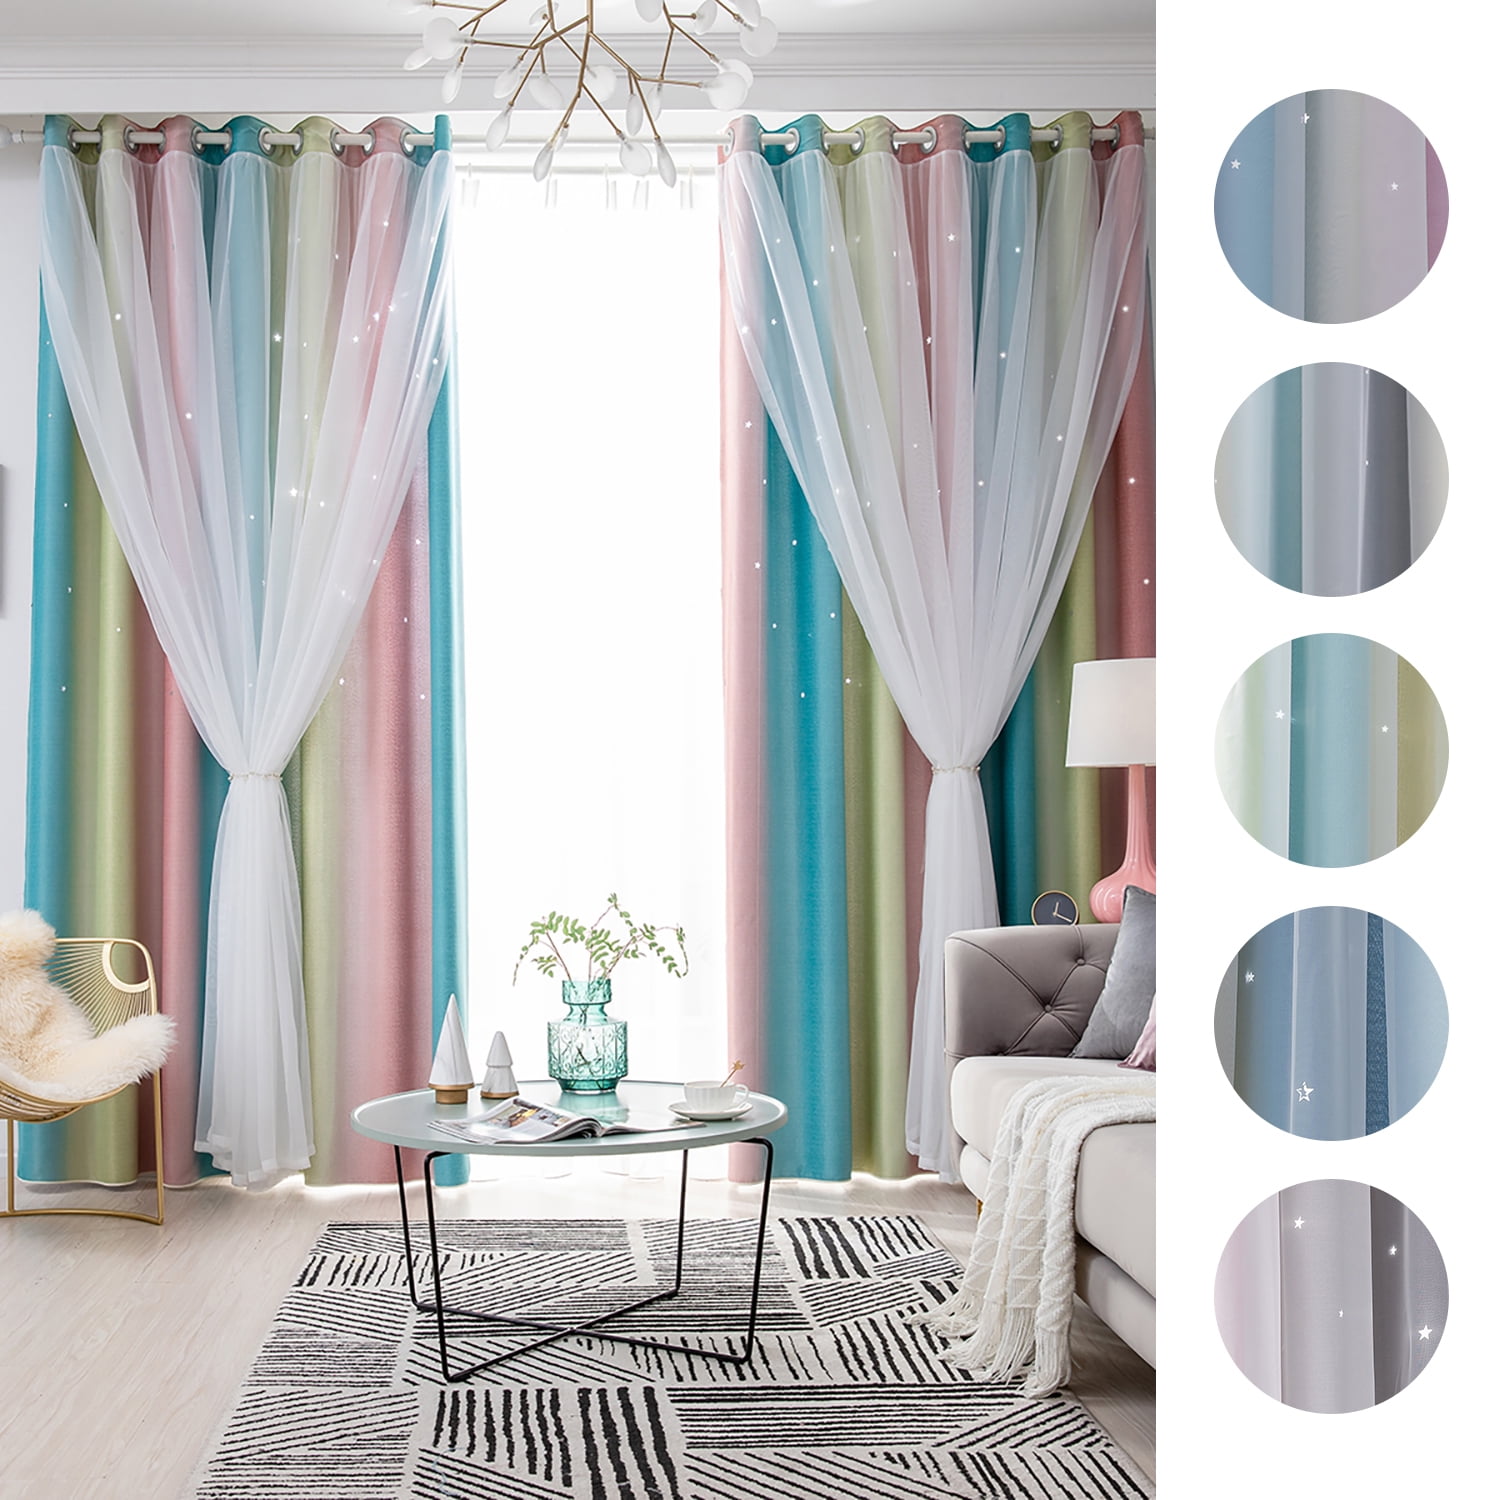 Details about   Window Screening Tulle Drap Sheer Curtains for Room Furniture Cover Rod 3 Sizes 